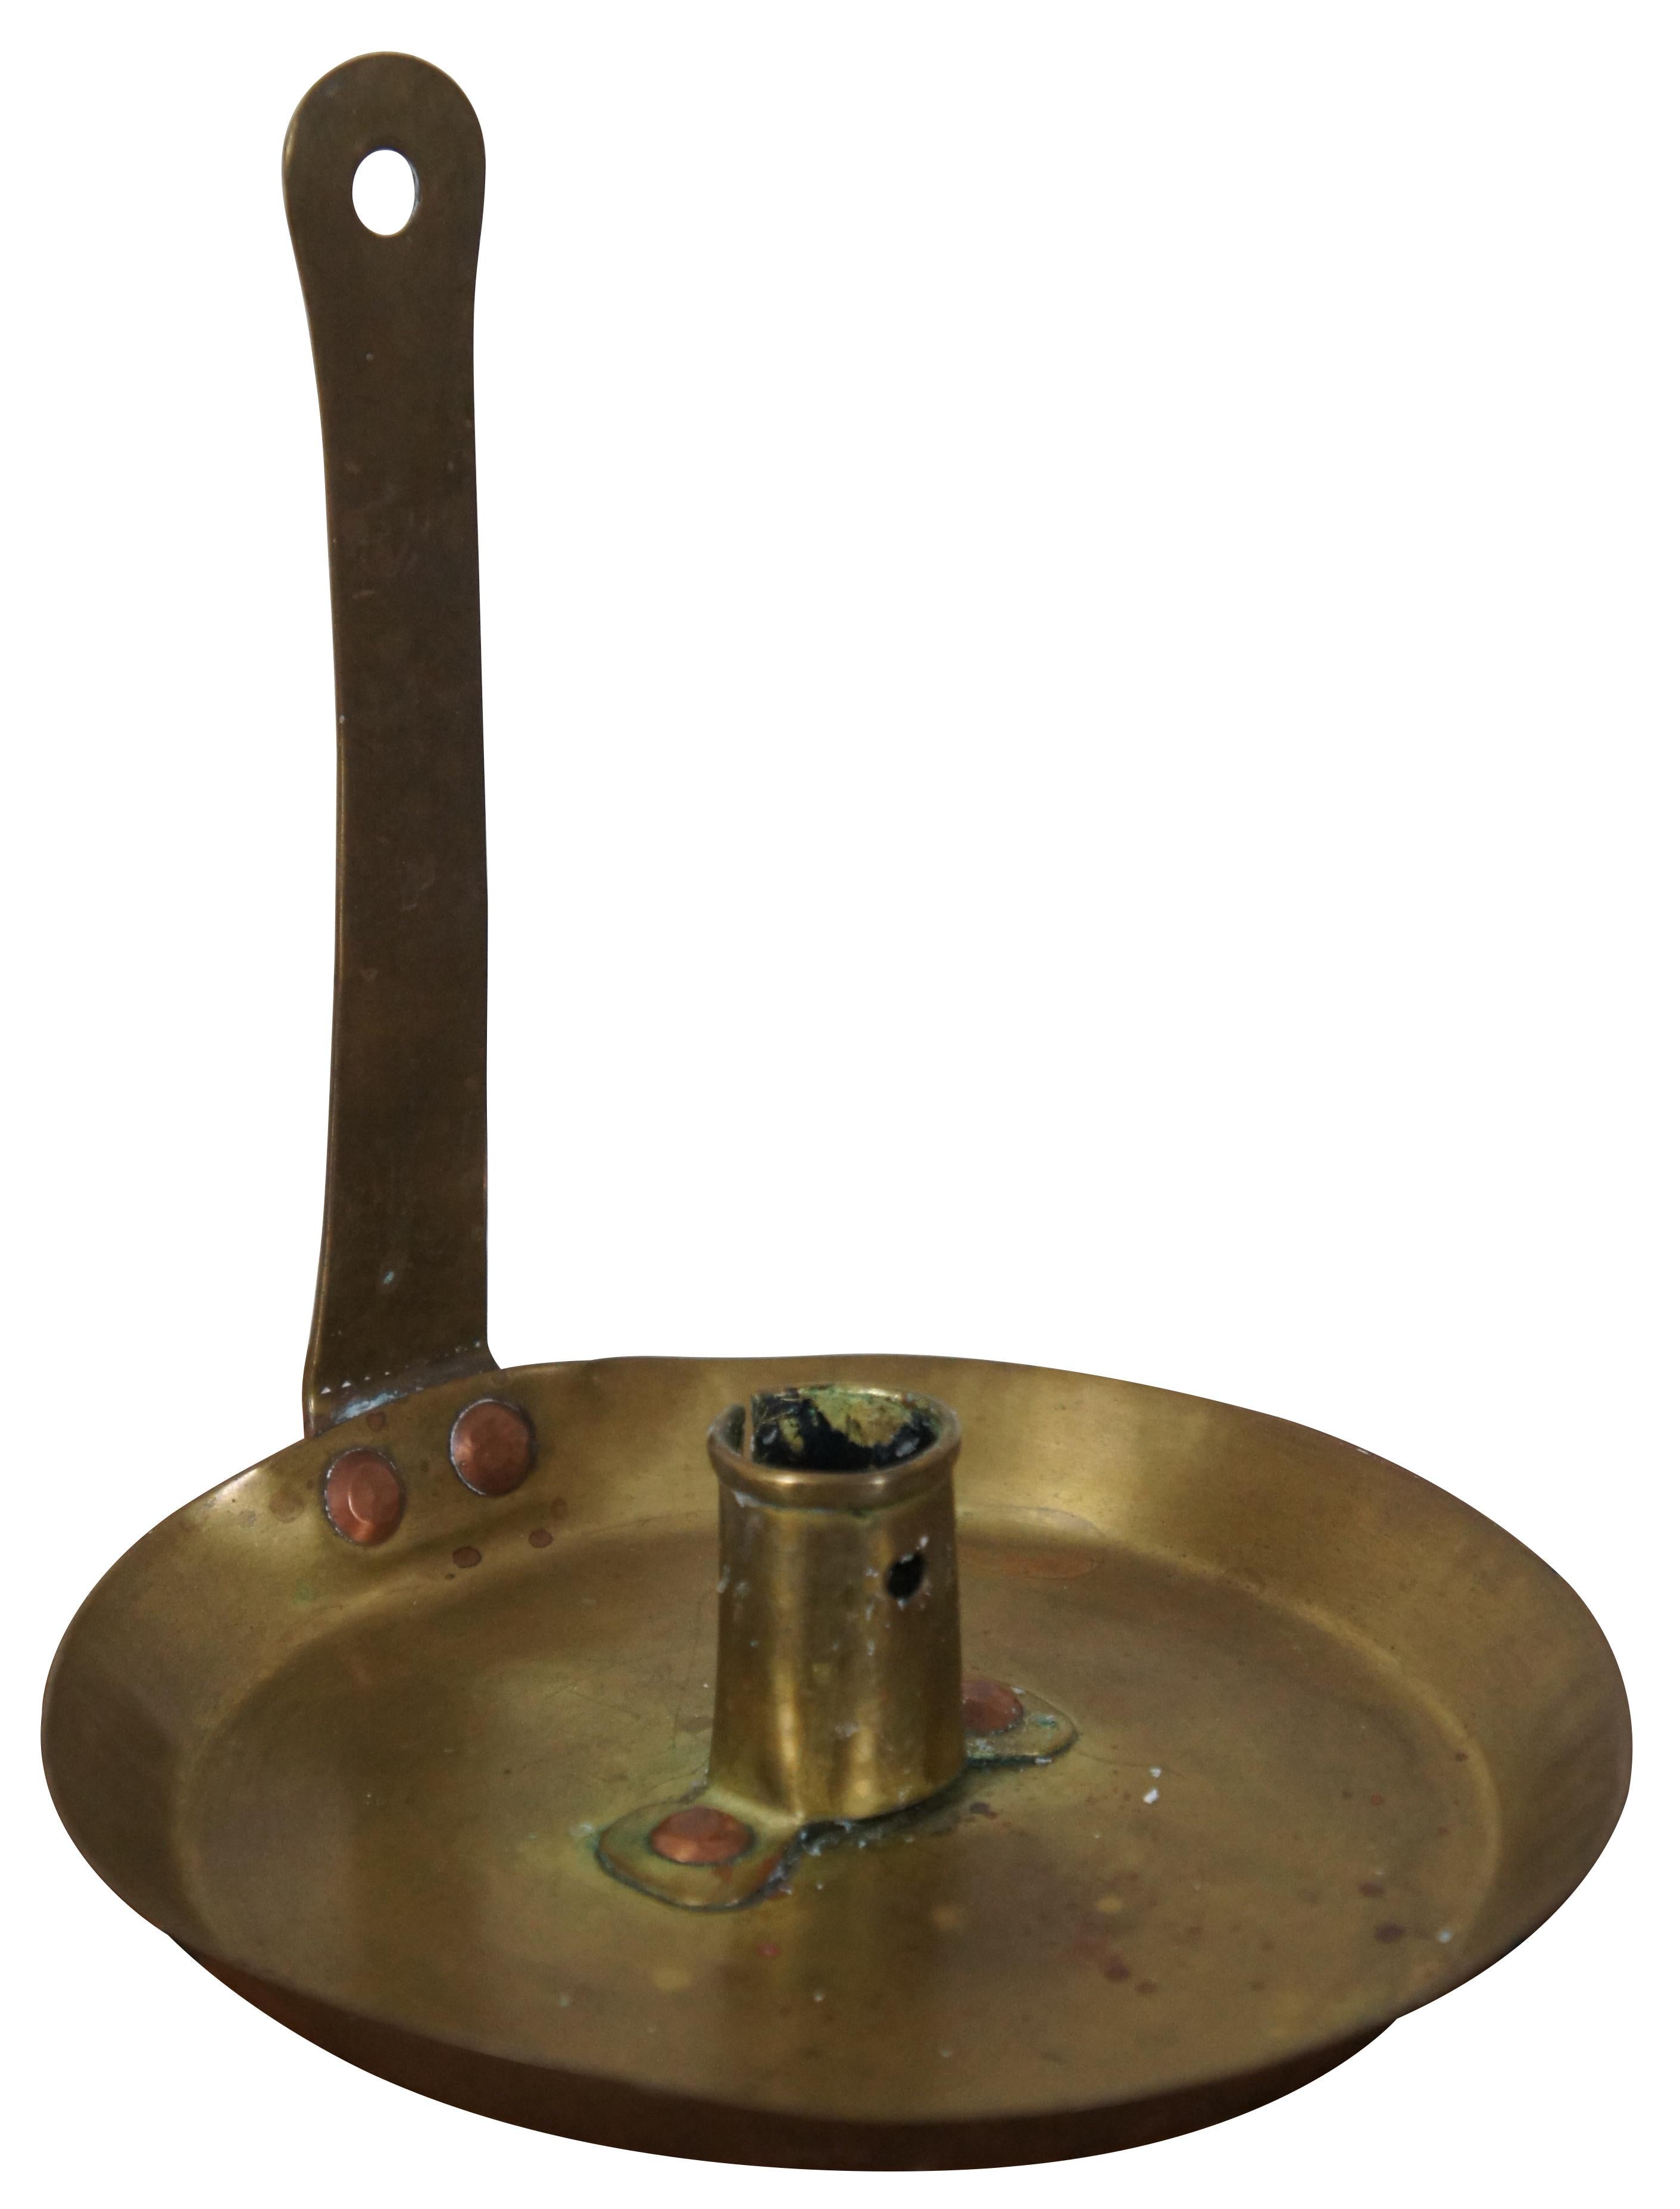 Rustic 2 Antique Brass Candle Holders Chamber Stick Wall Hanging Frying Pan Candlestick